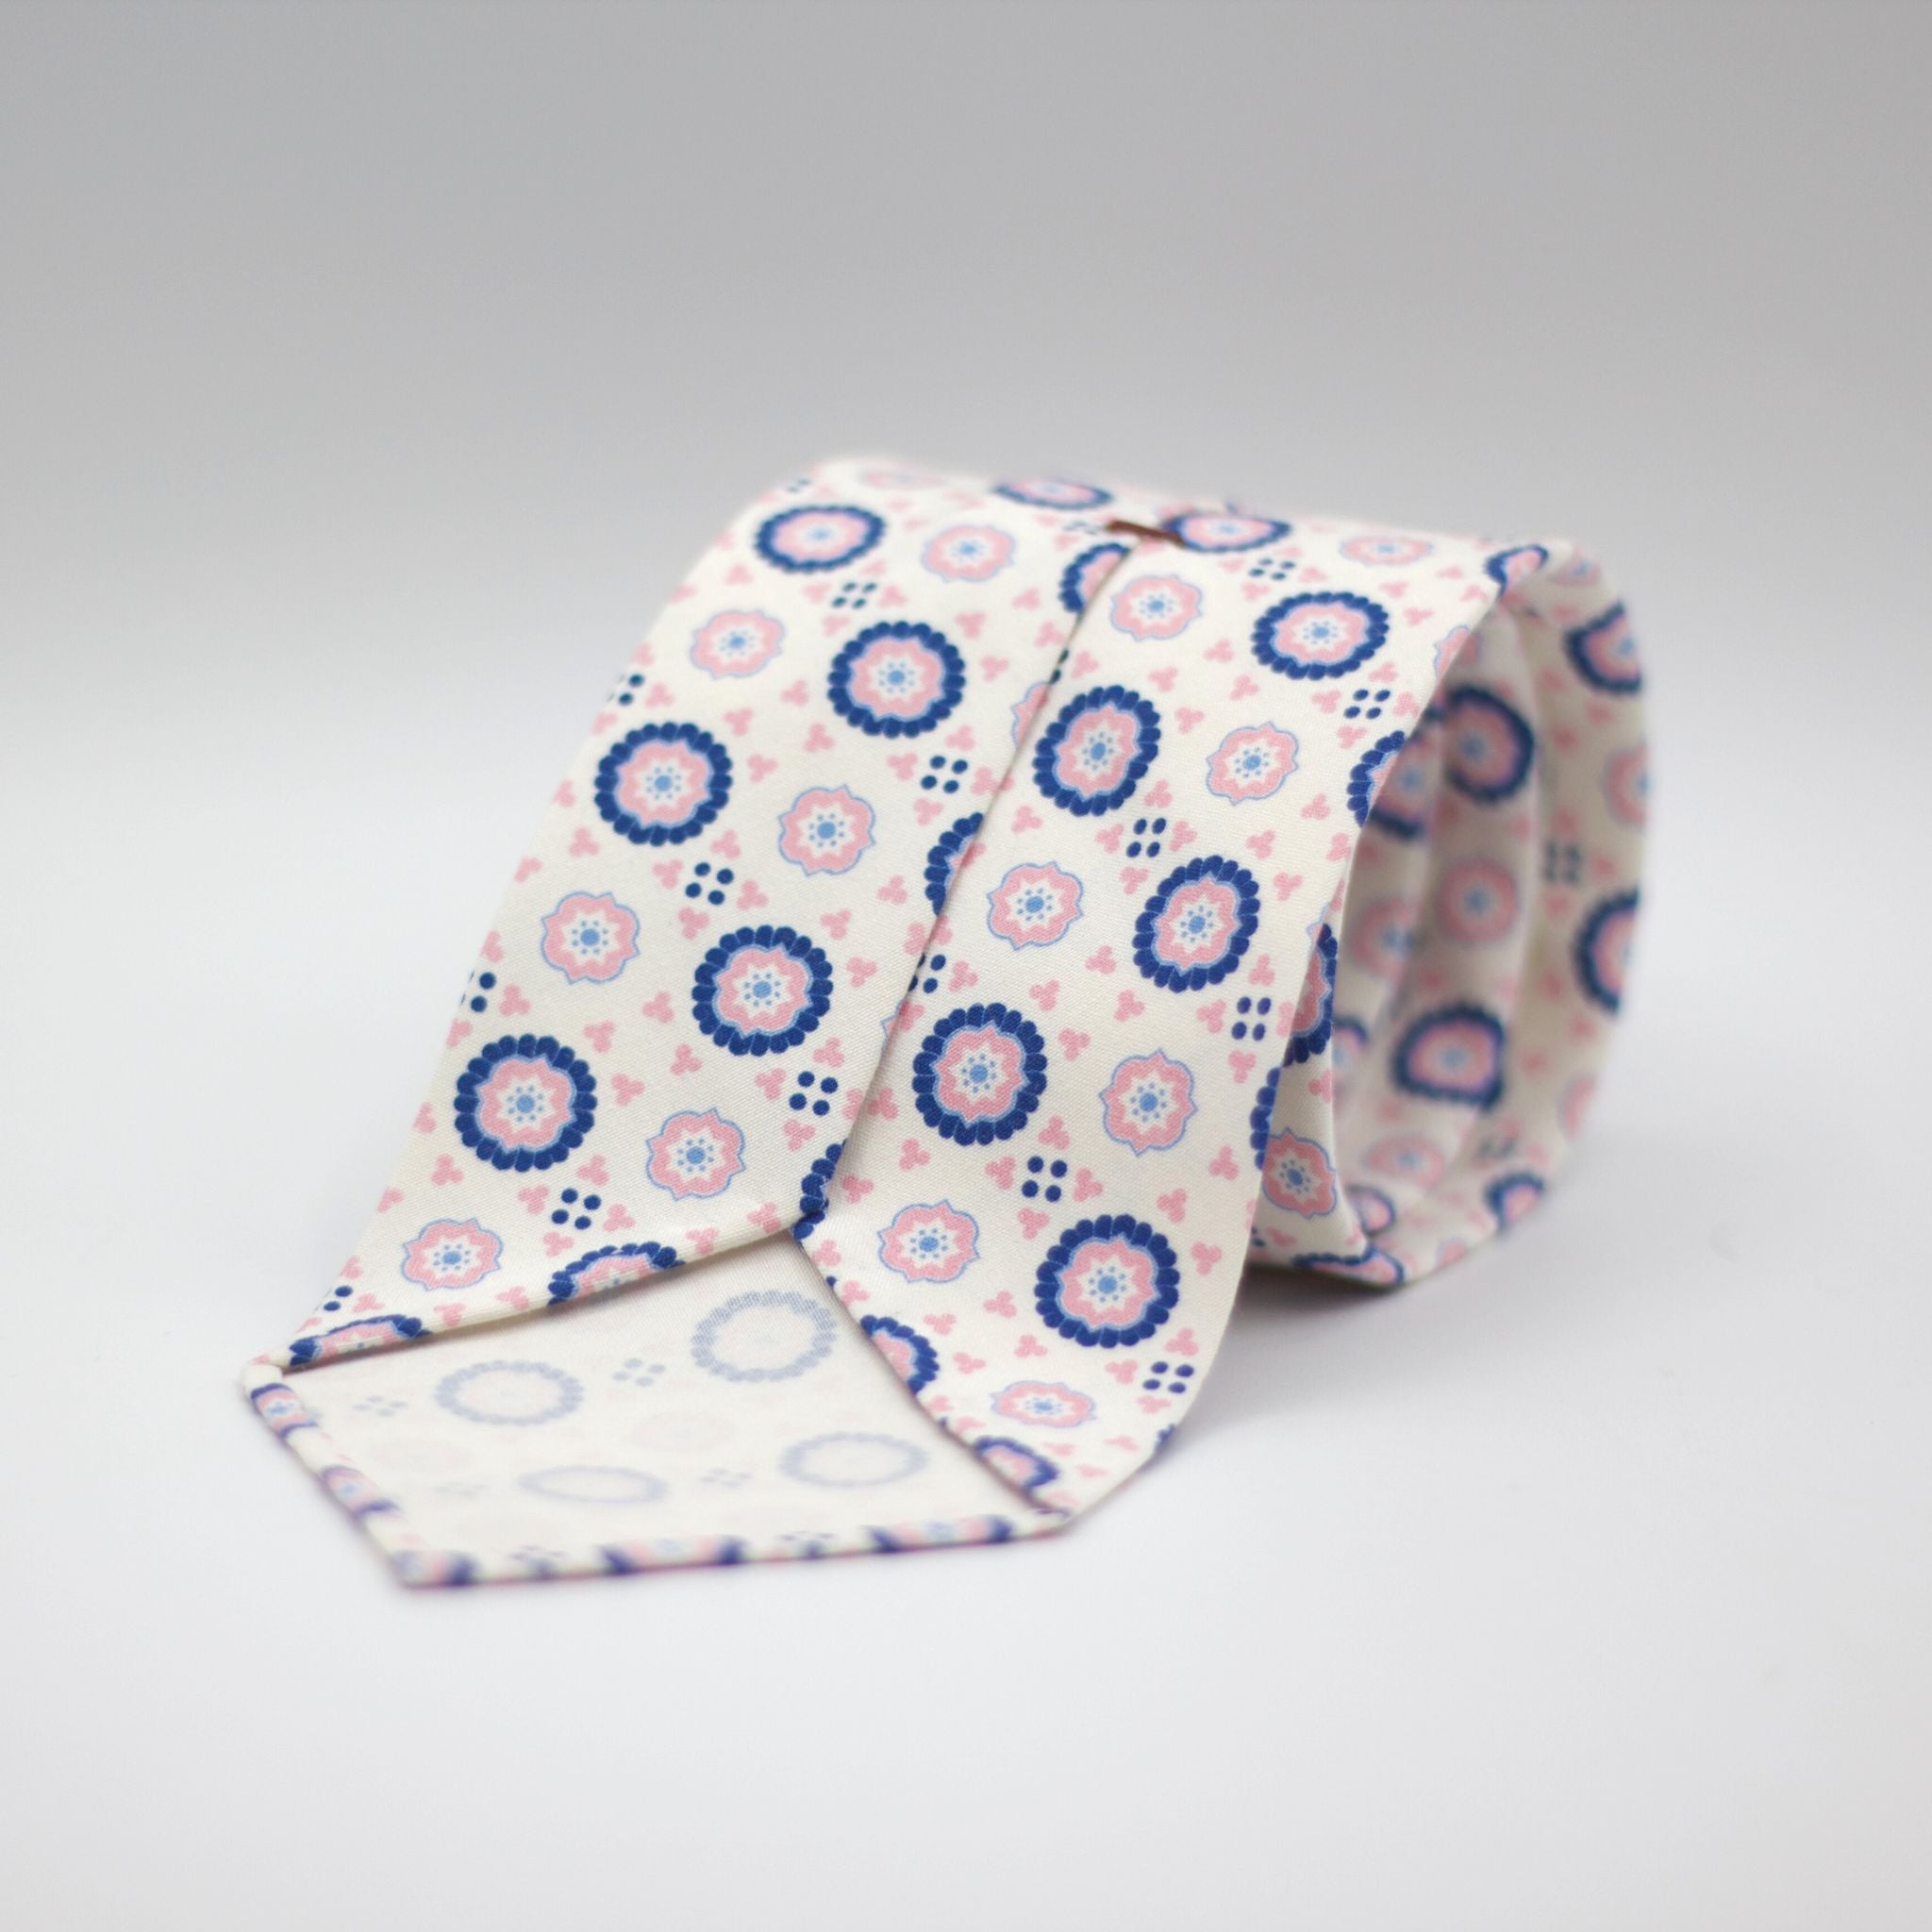 Cruciani & Bella - Printed Madder Silk  - Unlined - White, Pink and Blue Tie